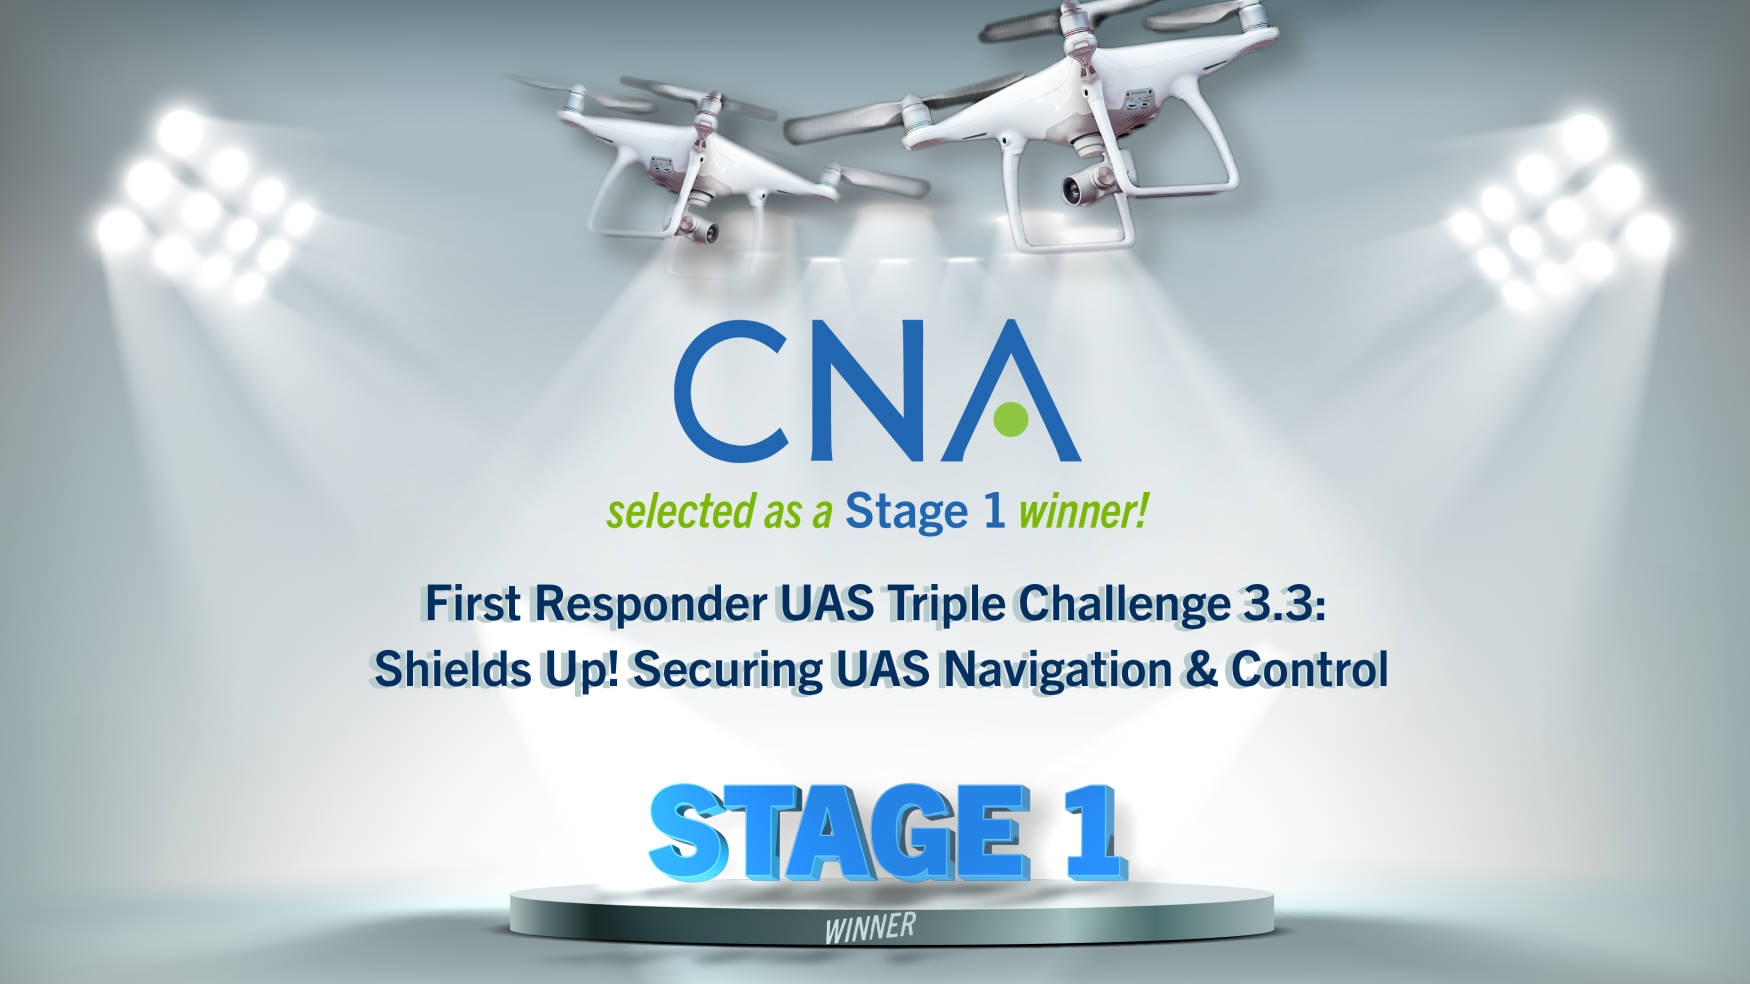 CNA selected as a Stage 1 winner: First Responder UAS Triple Challenge